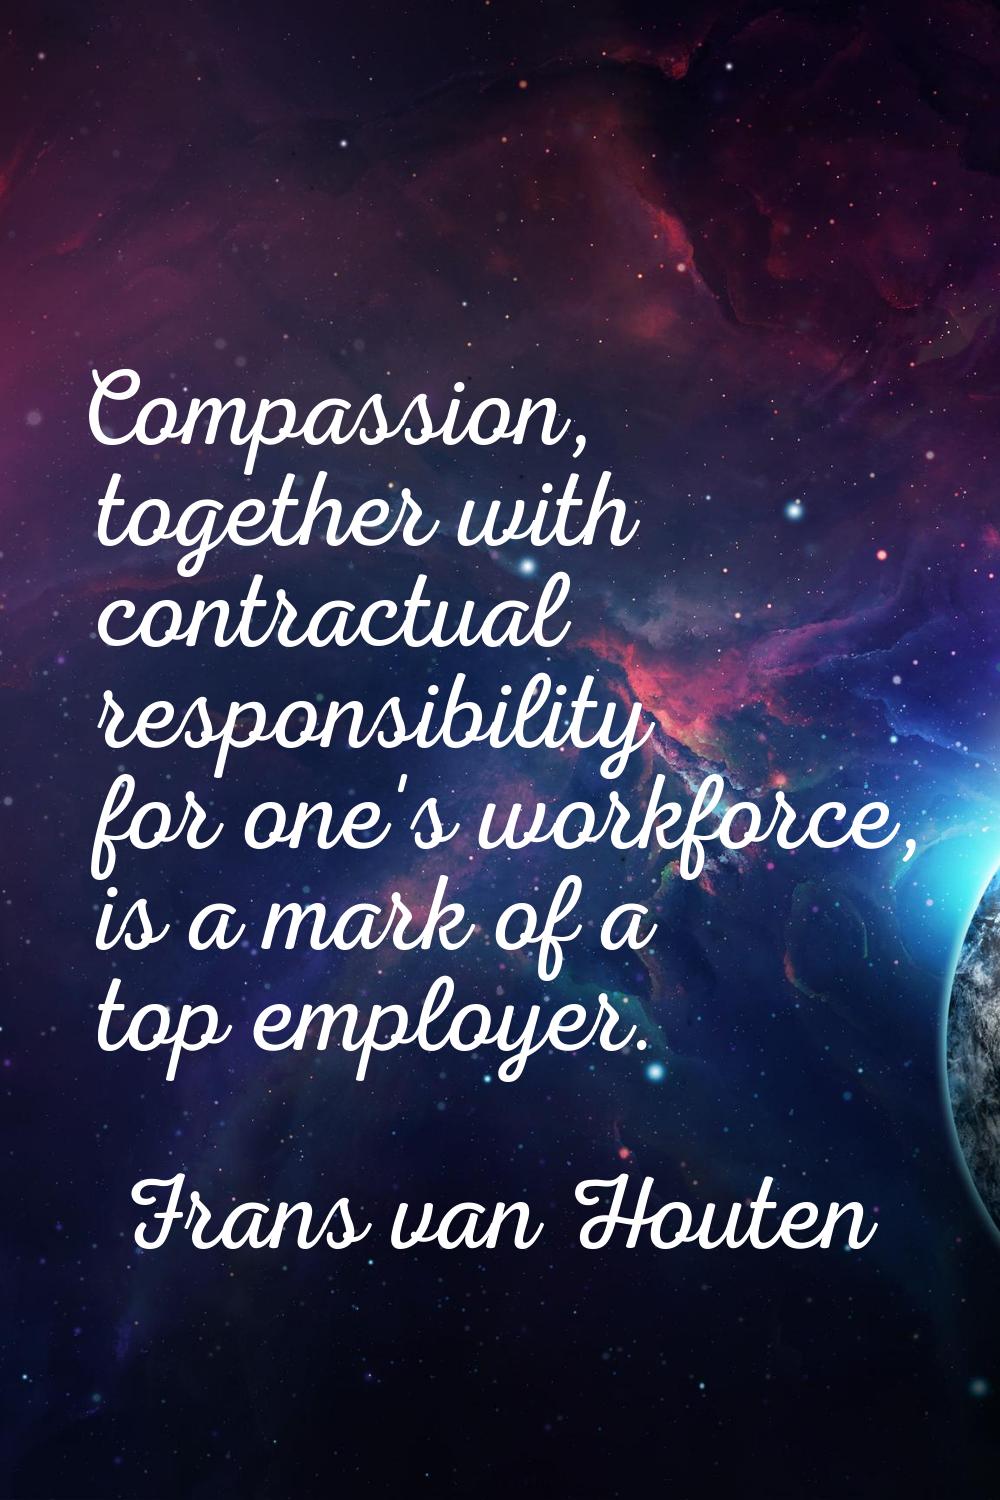 Compassion, together with contractual responsibility for one's workforce, is a mark of a top employ